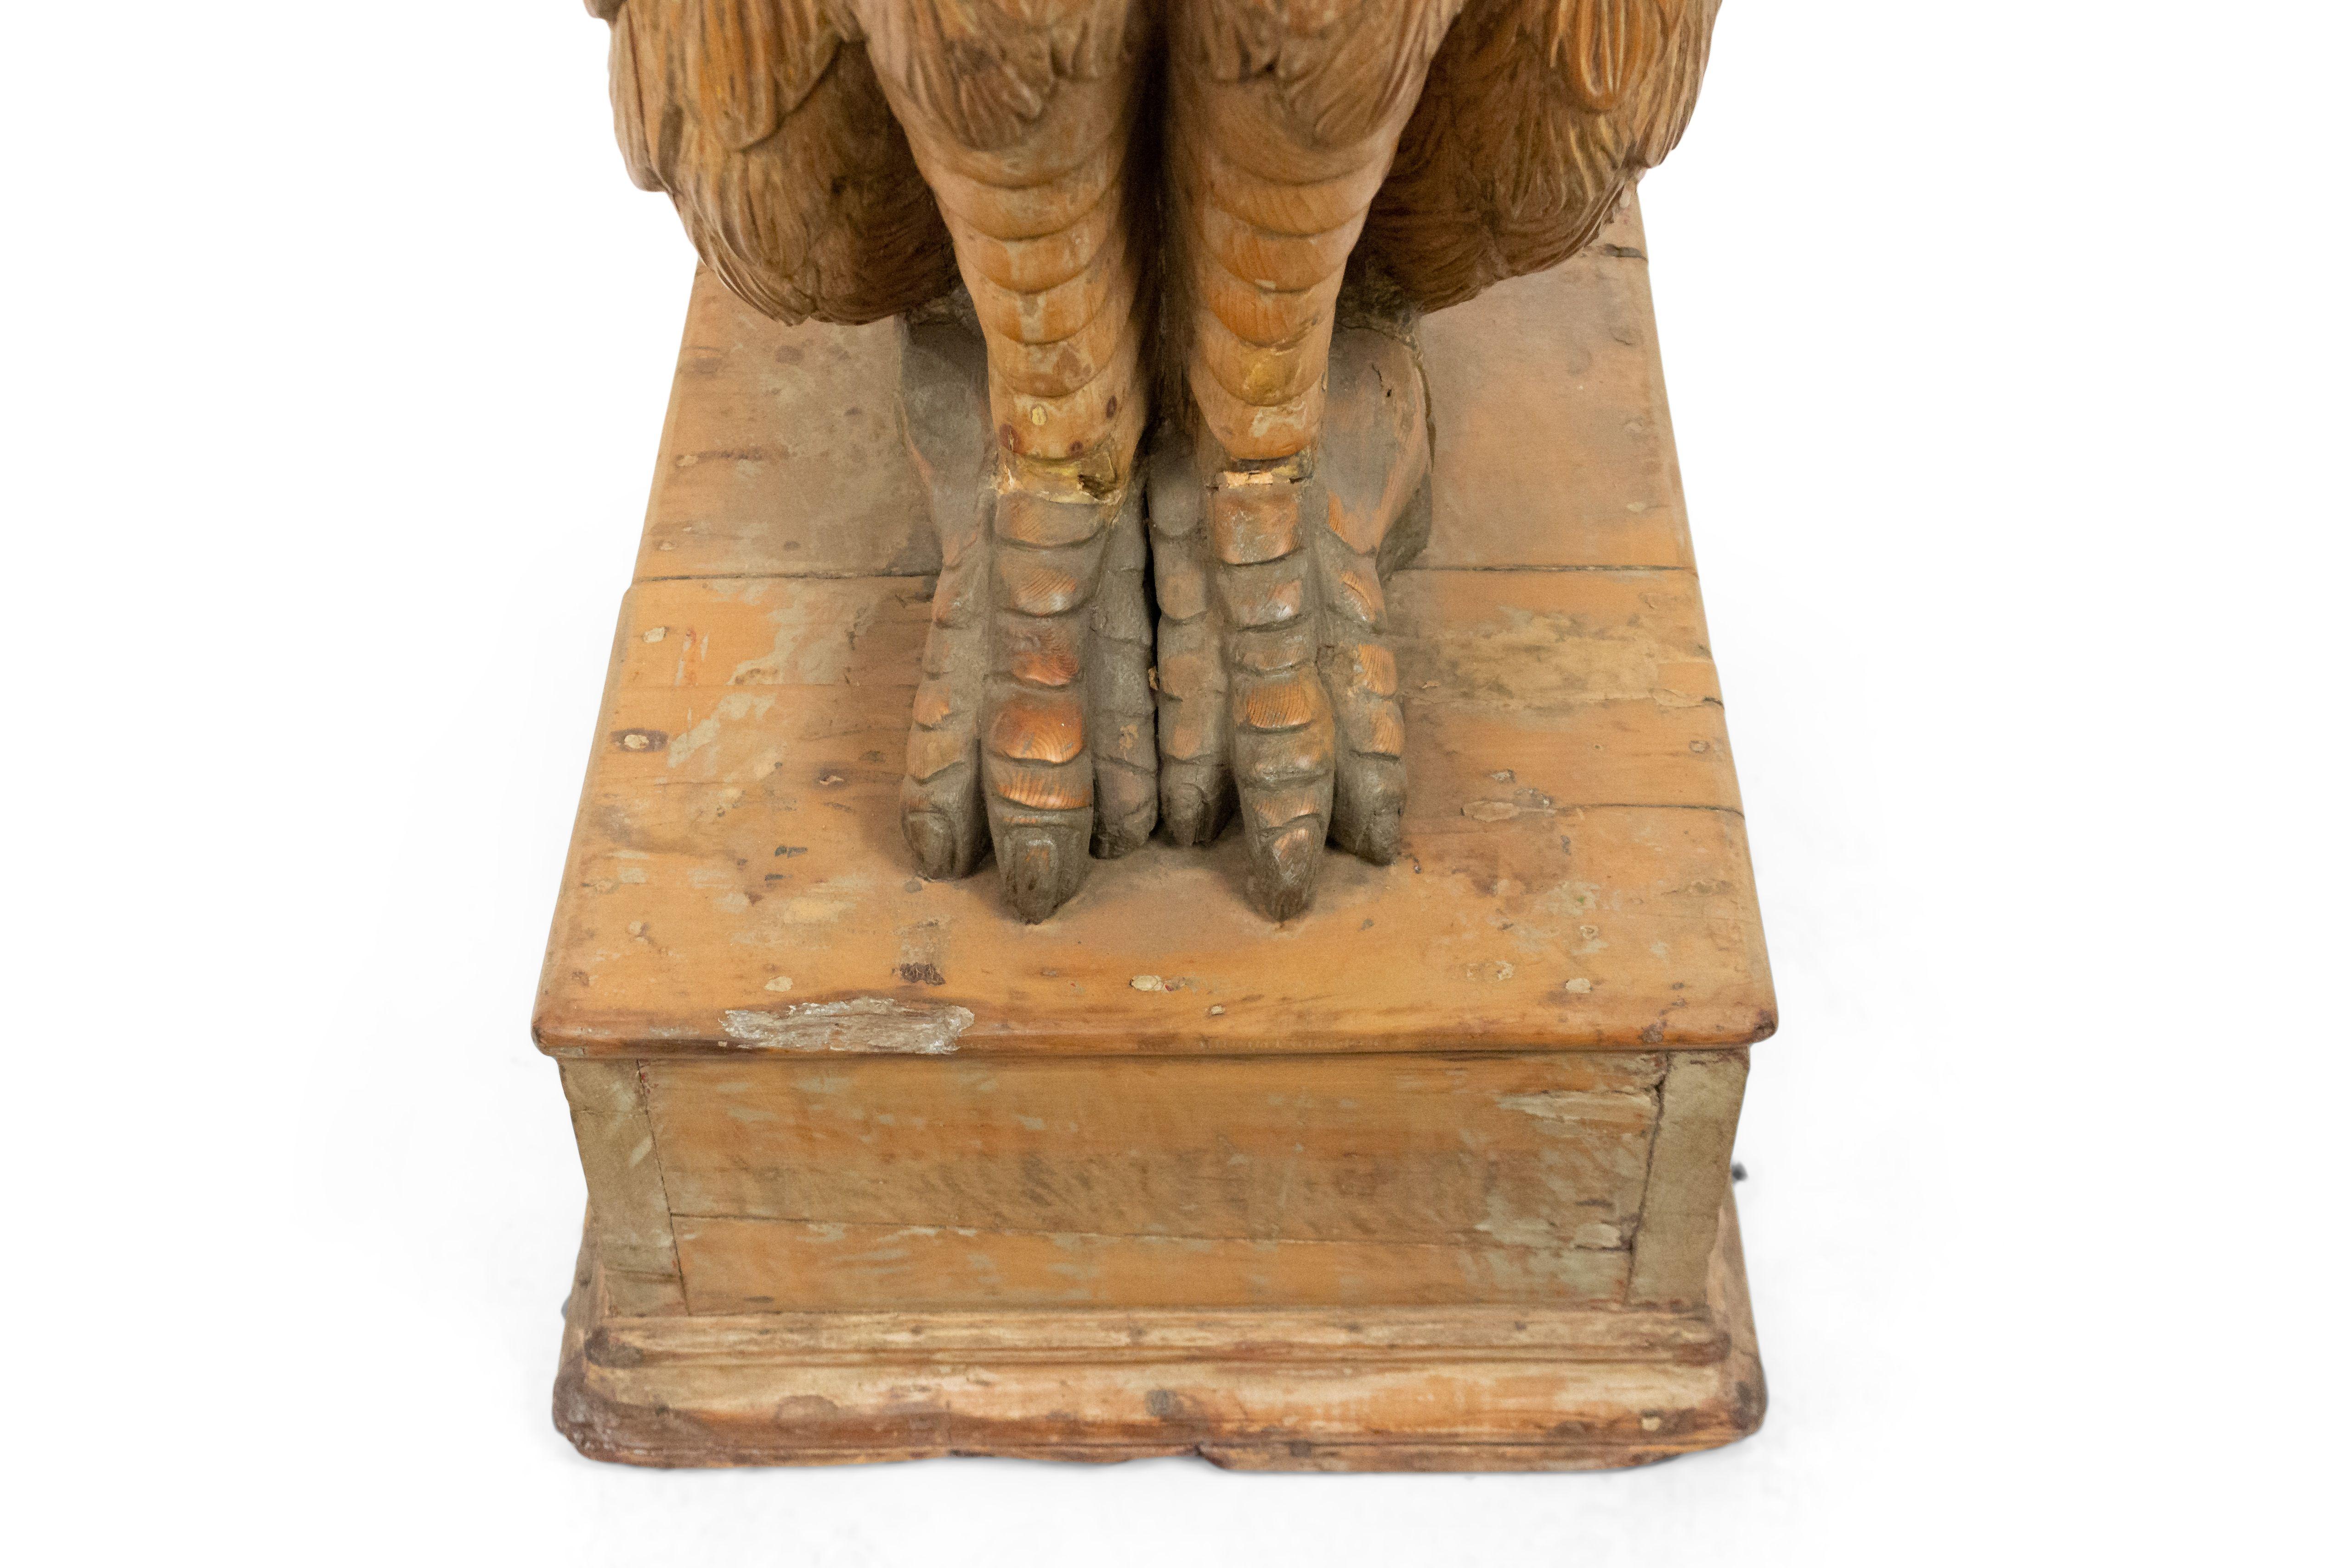 19th Century Dutch Carved Monumental Wood Eagle Figure Seated on a Pedestal For Sale 4